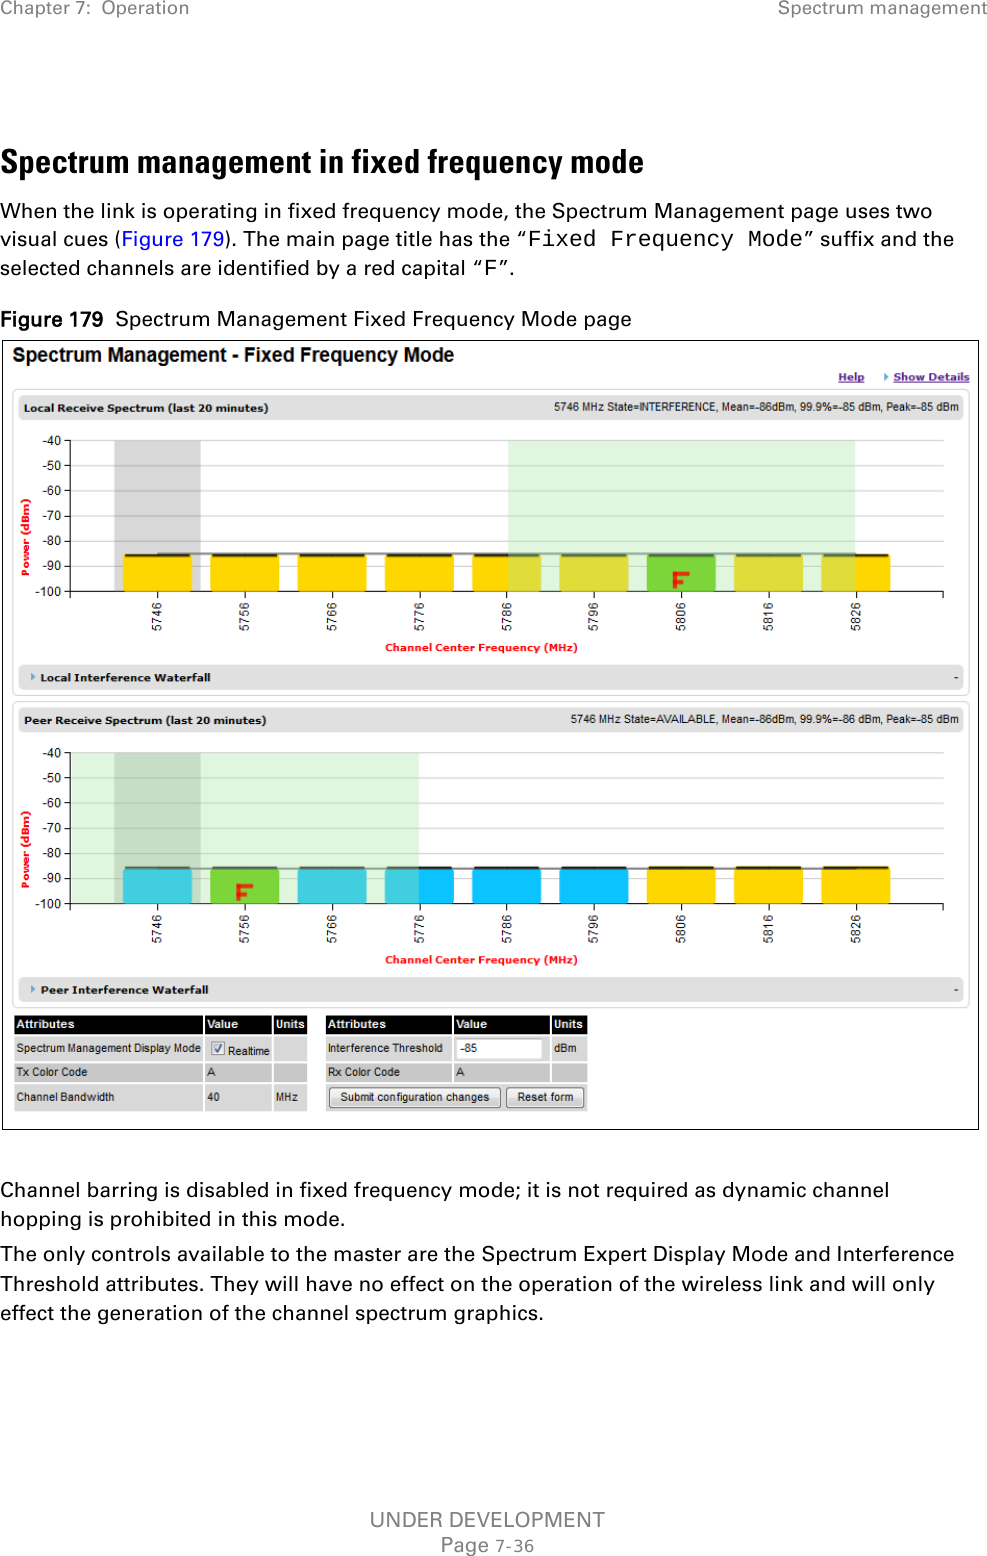 Chapter 7:  Operation Spectrum management   Spectrum management in fixed frequency mode When the link is operating in fixed frequency mode, the Spectrum Management page uses two visual cues (Figure 179). The main page title has the “Fixed Frequency Mode” suffix and the selected channels are identified by a red capital “F”. Figure 179  Spectrum Management Fixed Frequency Mode page   Channel barring is disabled in fixed frequency mode; it is not required as dynamic channel hopping is prohibited in this mode. The only controls available to the master are the Spectrum Expert Display Mode and Interference Threshold attributes. They will have no effect on the operation of the wireless link and will only effect the generation of the channel spectrum graphics.   UNDER DEVELOPMENT Page 7-36 